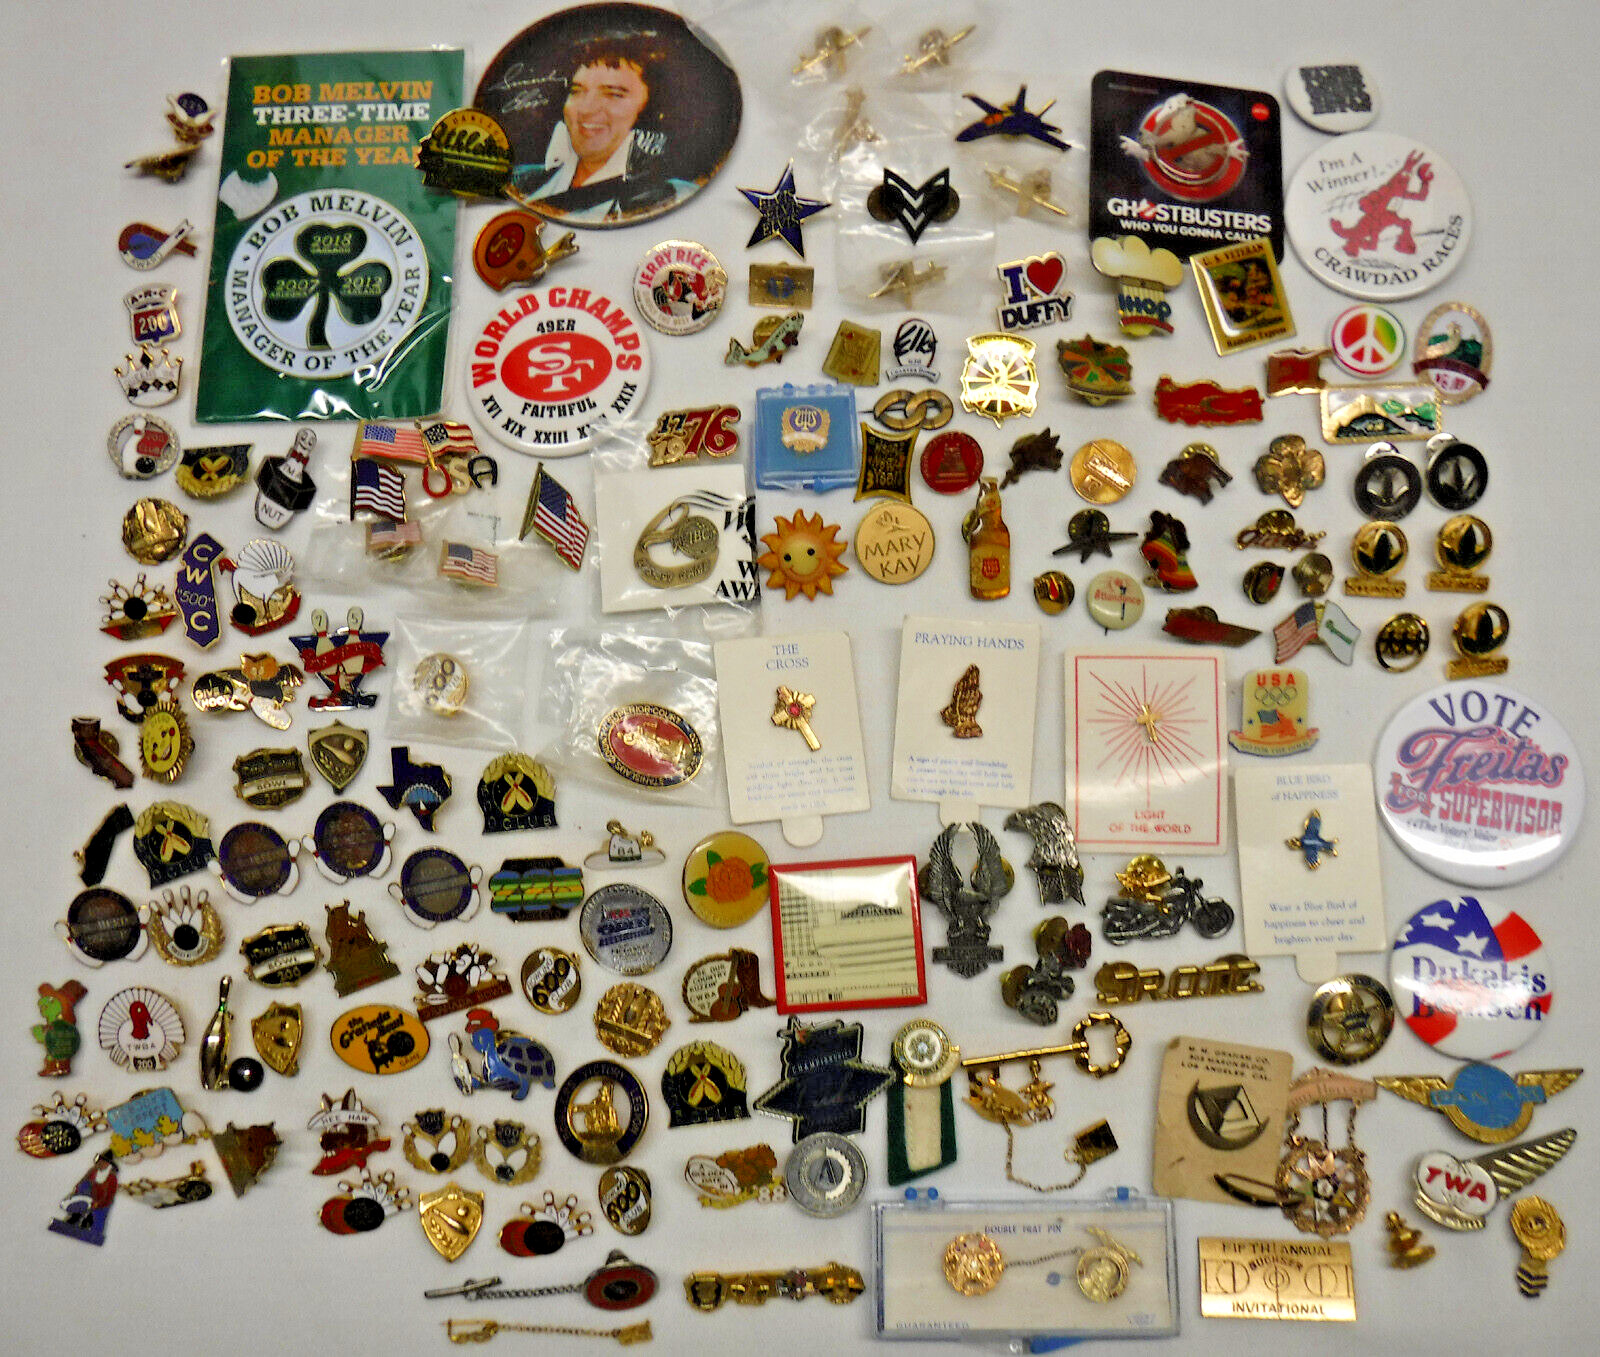 157 pc vintage LAPEL HAT PIN PINBACK BADGE lot Sports Military Advertising Clubs